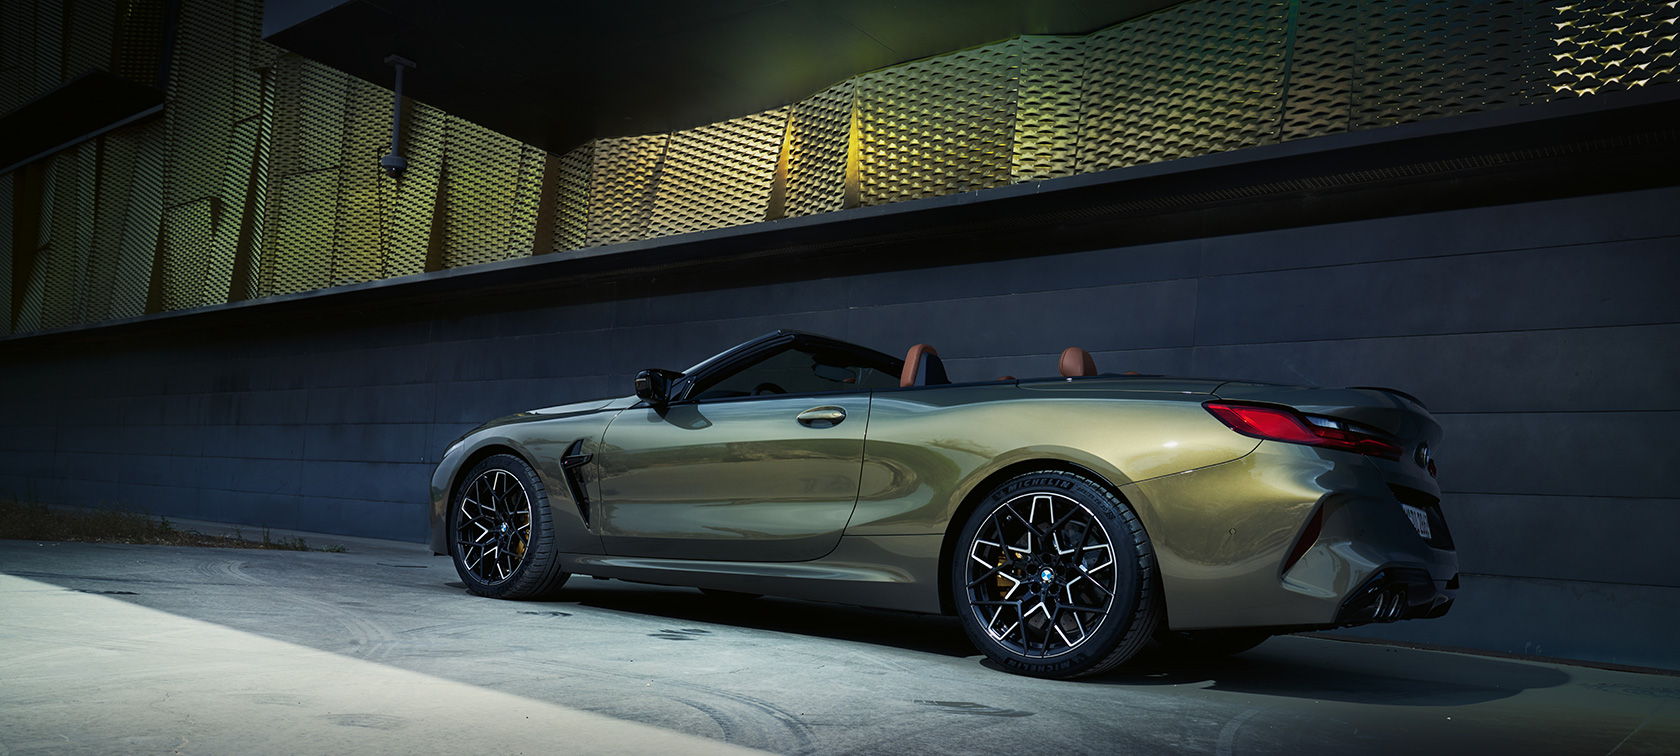 BMW M8 Competition Convertible F91 LCI Facelift 2022 BMW Individual Brass metallic three-quarter side view standing in front of a wall